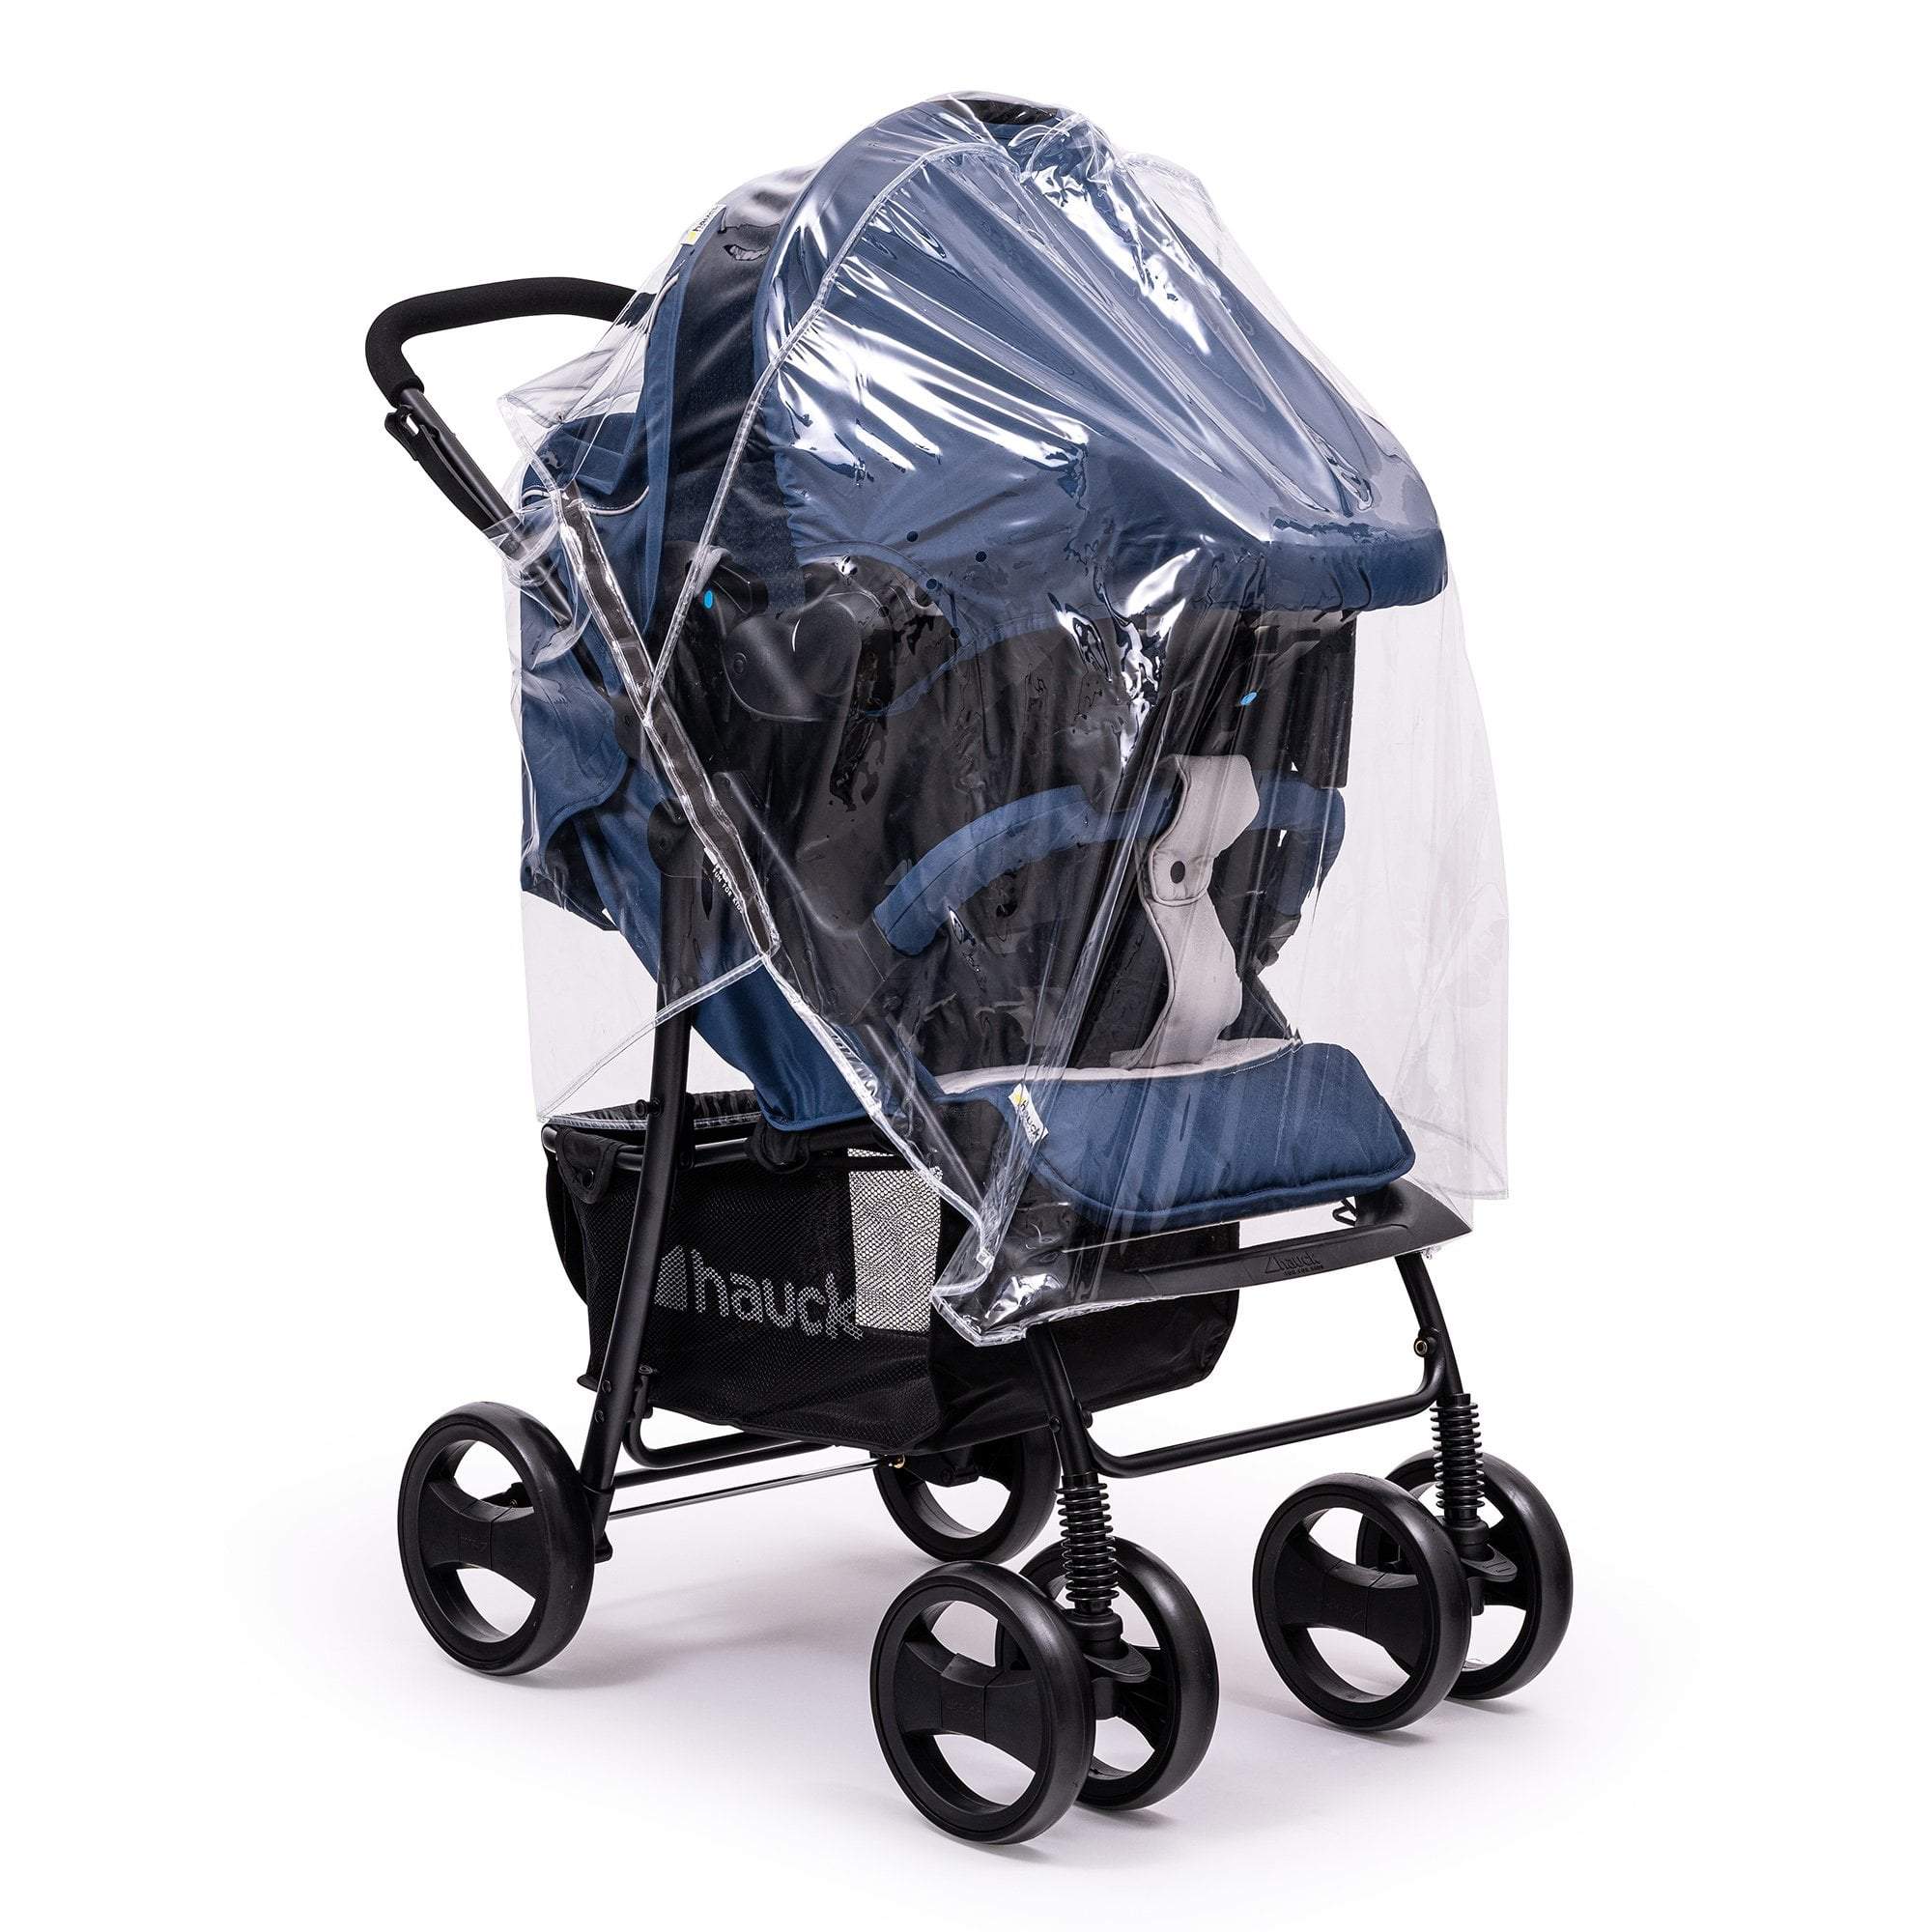 Travel System Raincover Compatible with Roma - Fits All Models - For Your Little One